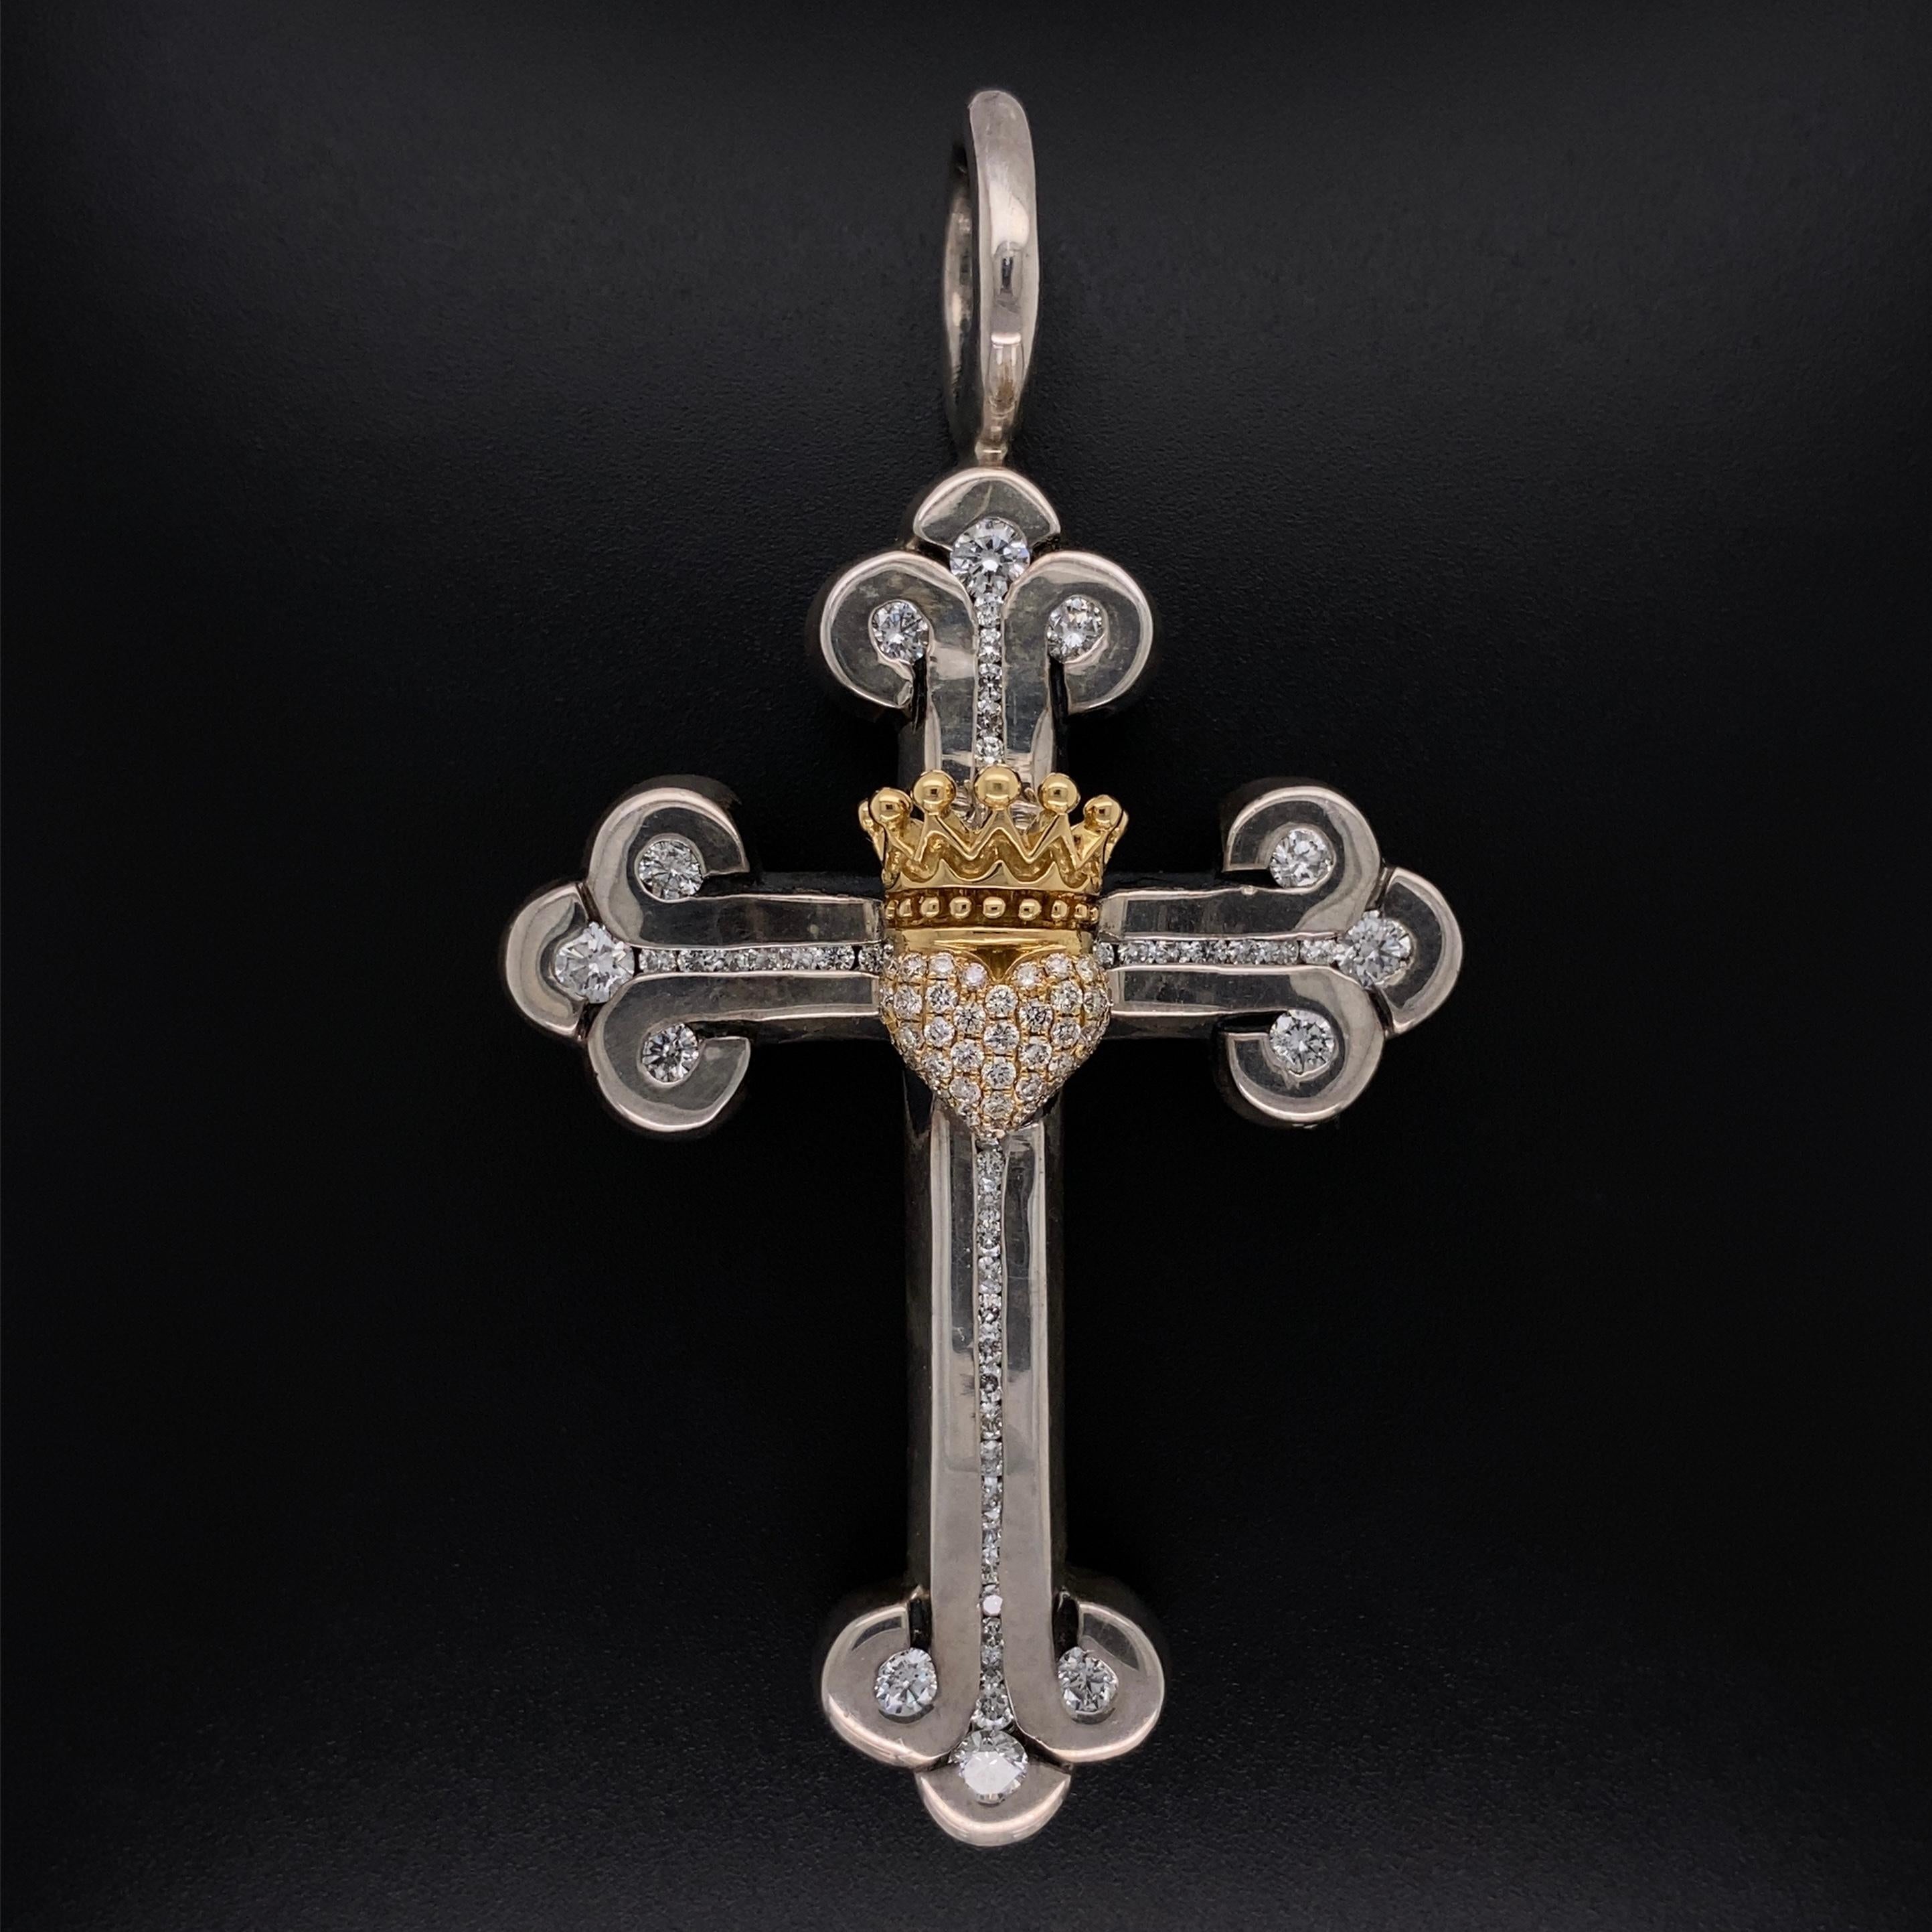 Signed KING BABY Diamond Cross Pendant. Hand set with 2.25tcw Diamonds and Hand crafted in yellow Gold and Sterling Silver. Approx. 3